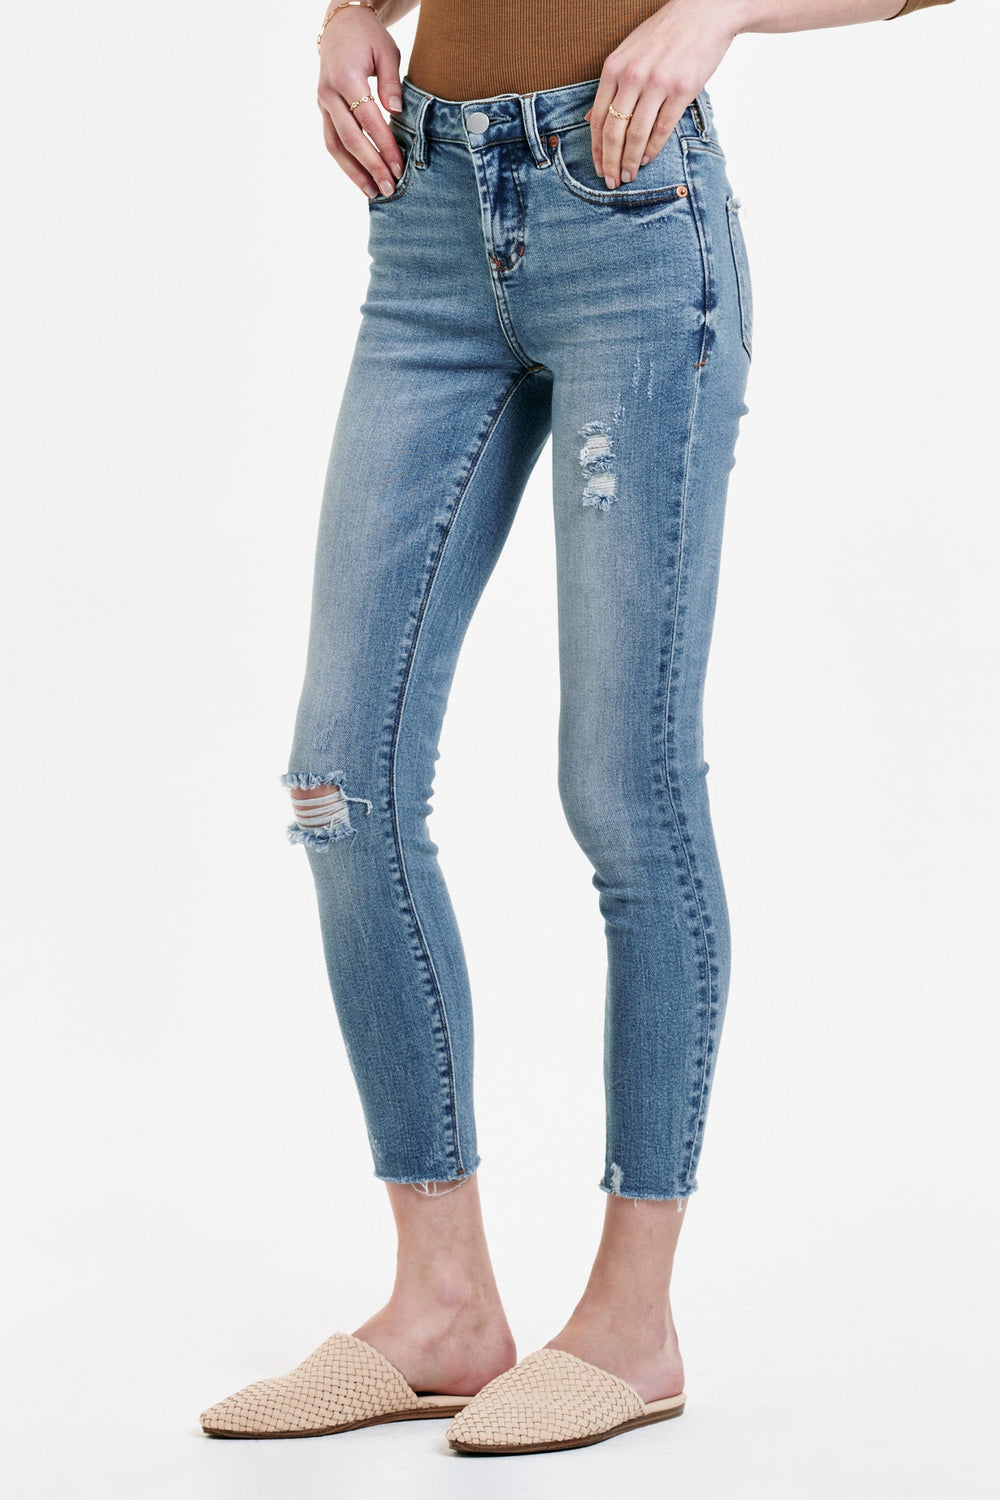 image of a female model wearing a GISELE HIGH RISE ANKLE SKINNY JEANS TAHITI JEANS